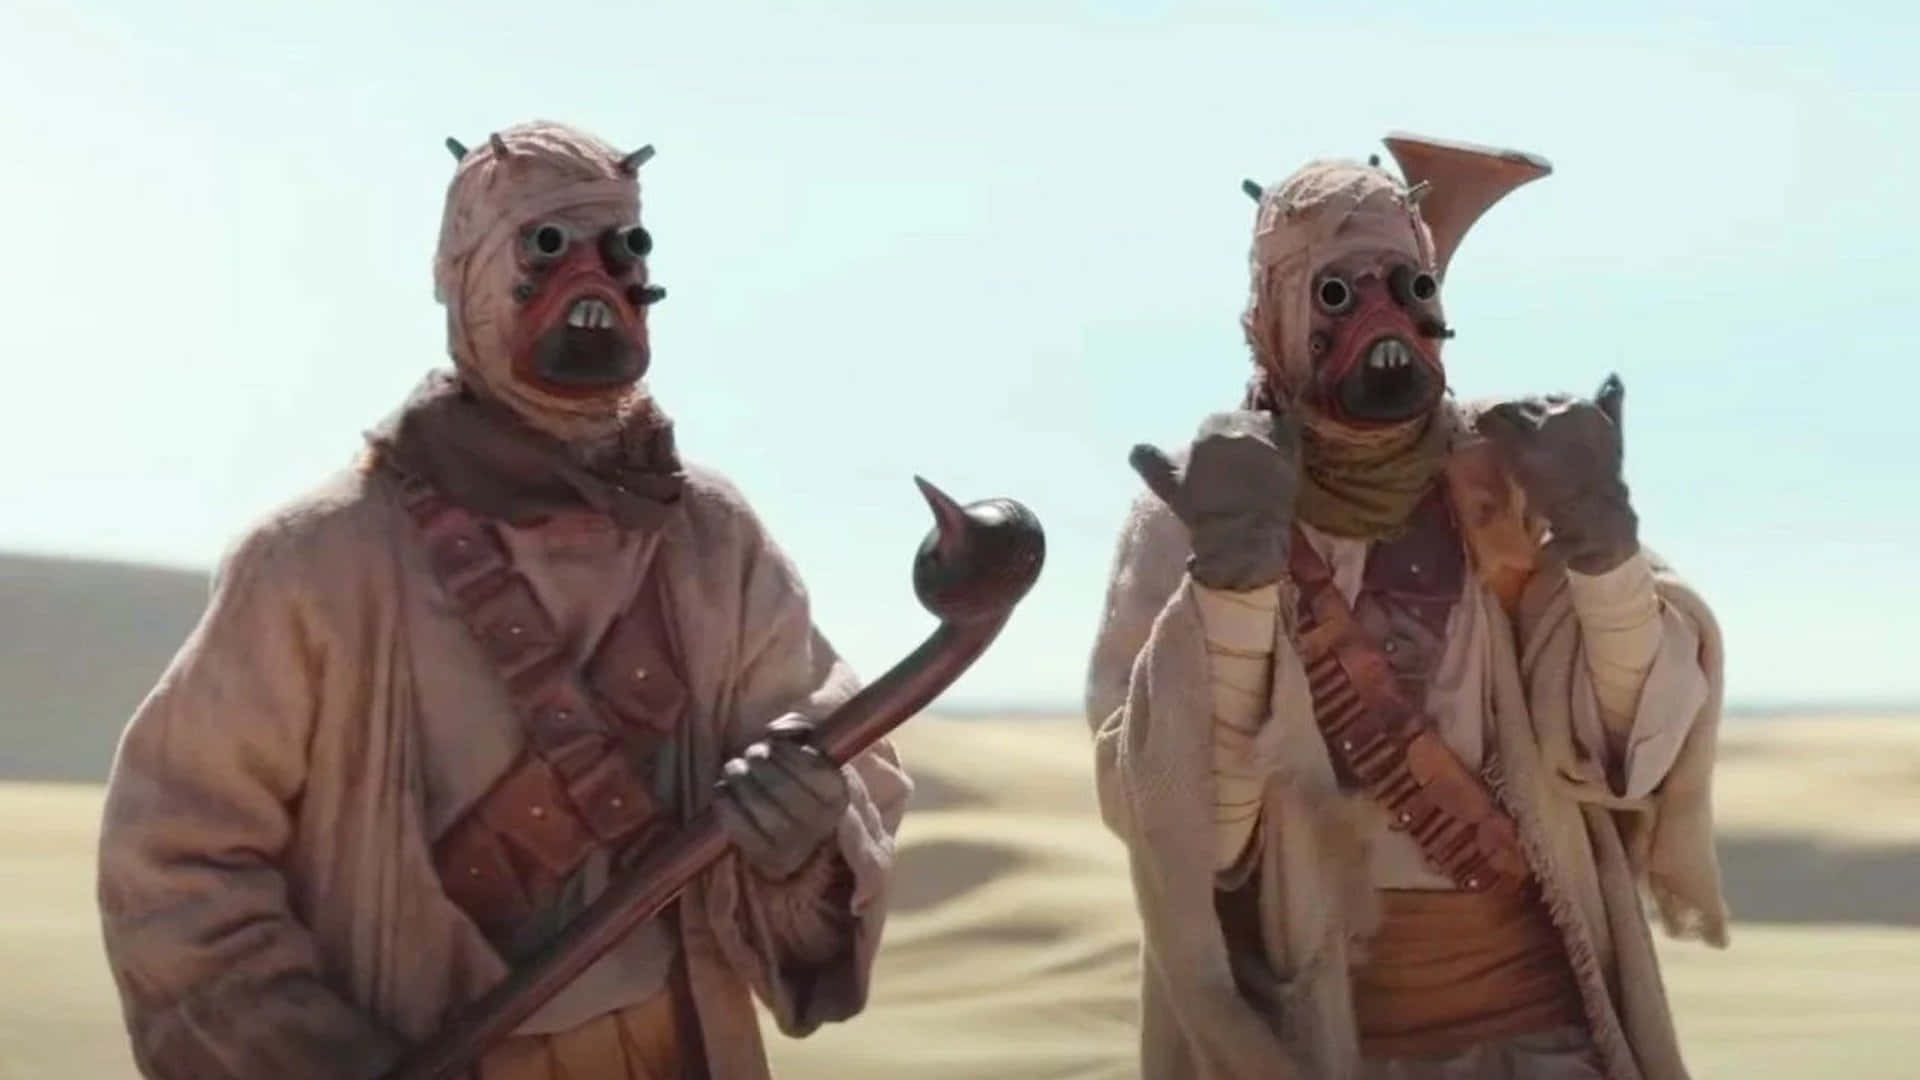 The Tusken Raiders Are Ready For Battle" Wallpaper